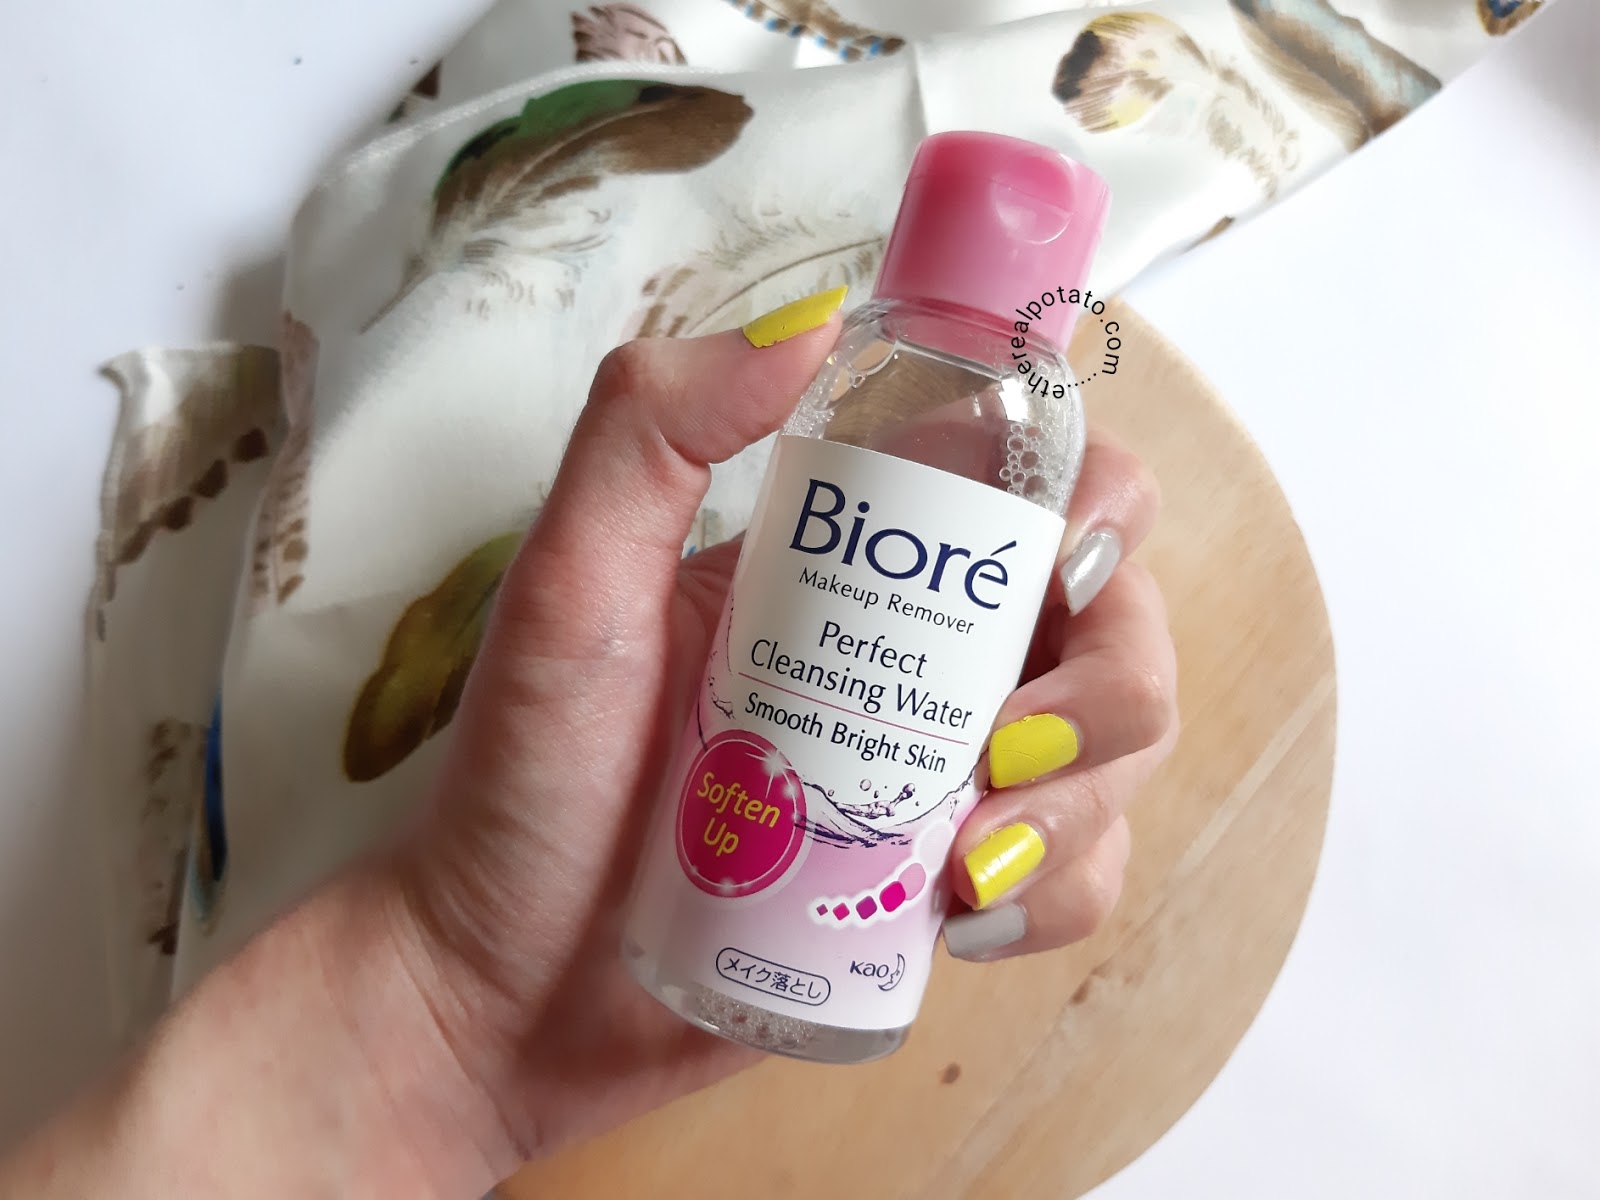 [REVIEW] Biore Makeup Remover Perfect Cleansing Water